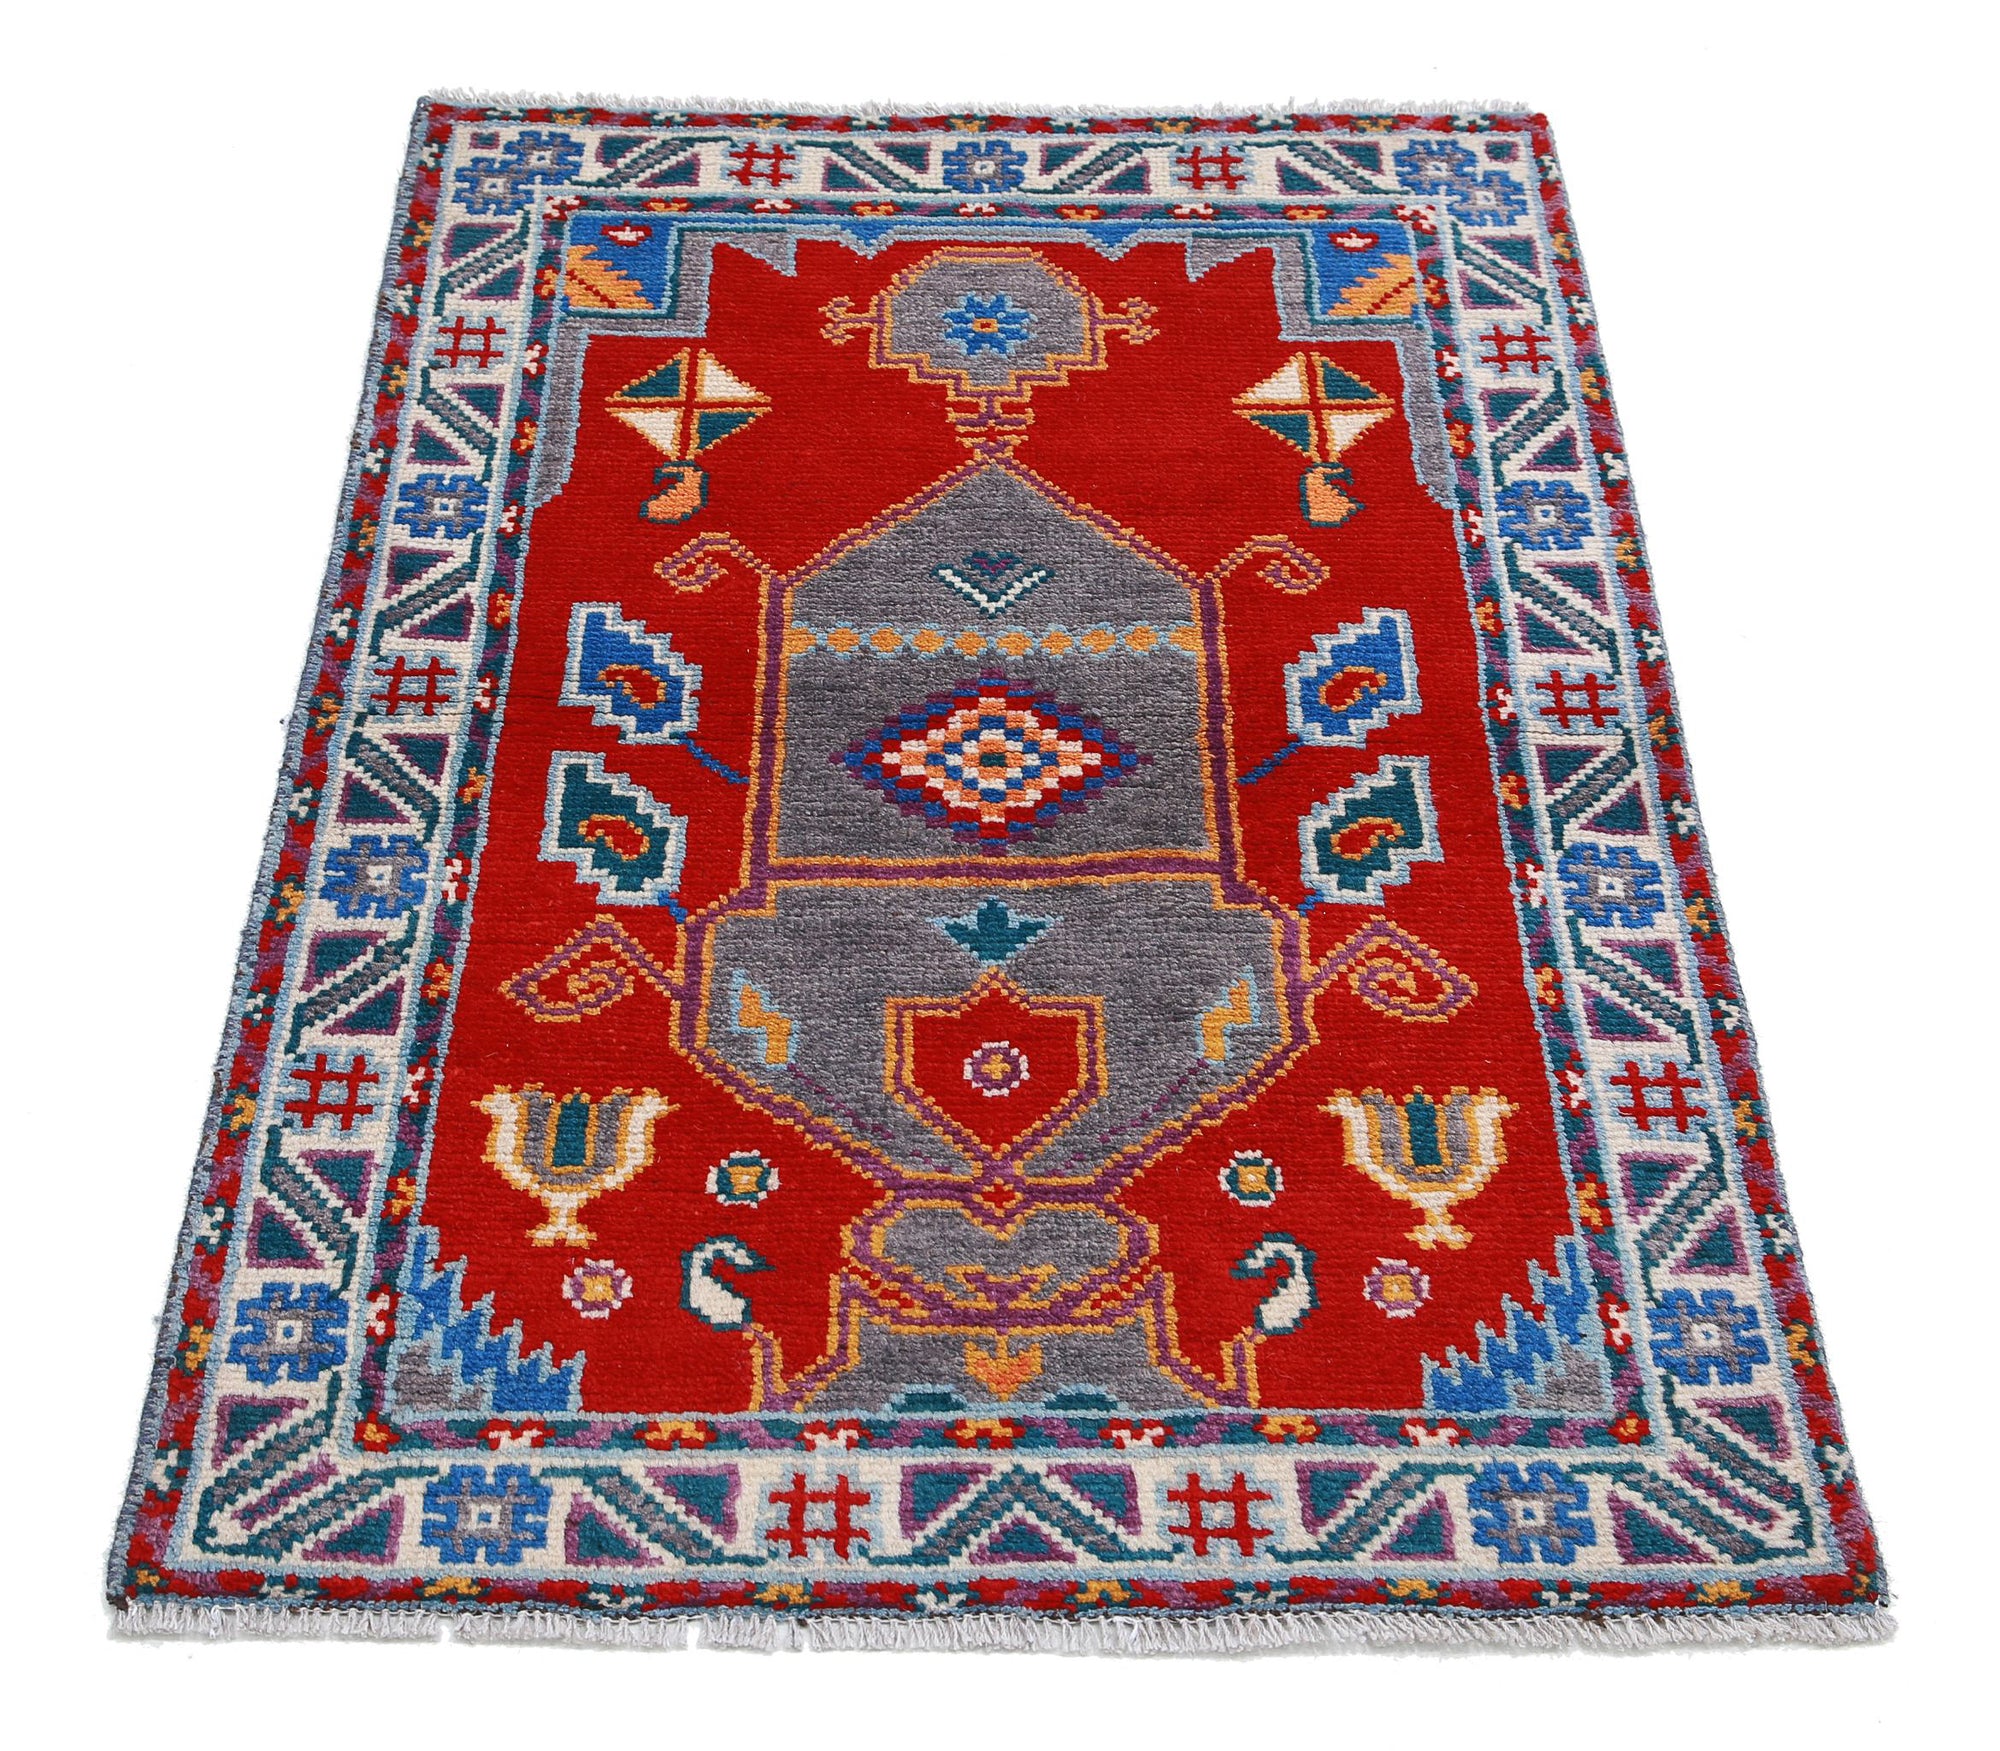 Revival-hand-knotted-qarghani-wool-rug-5014014-3.jpg